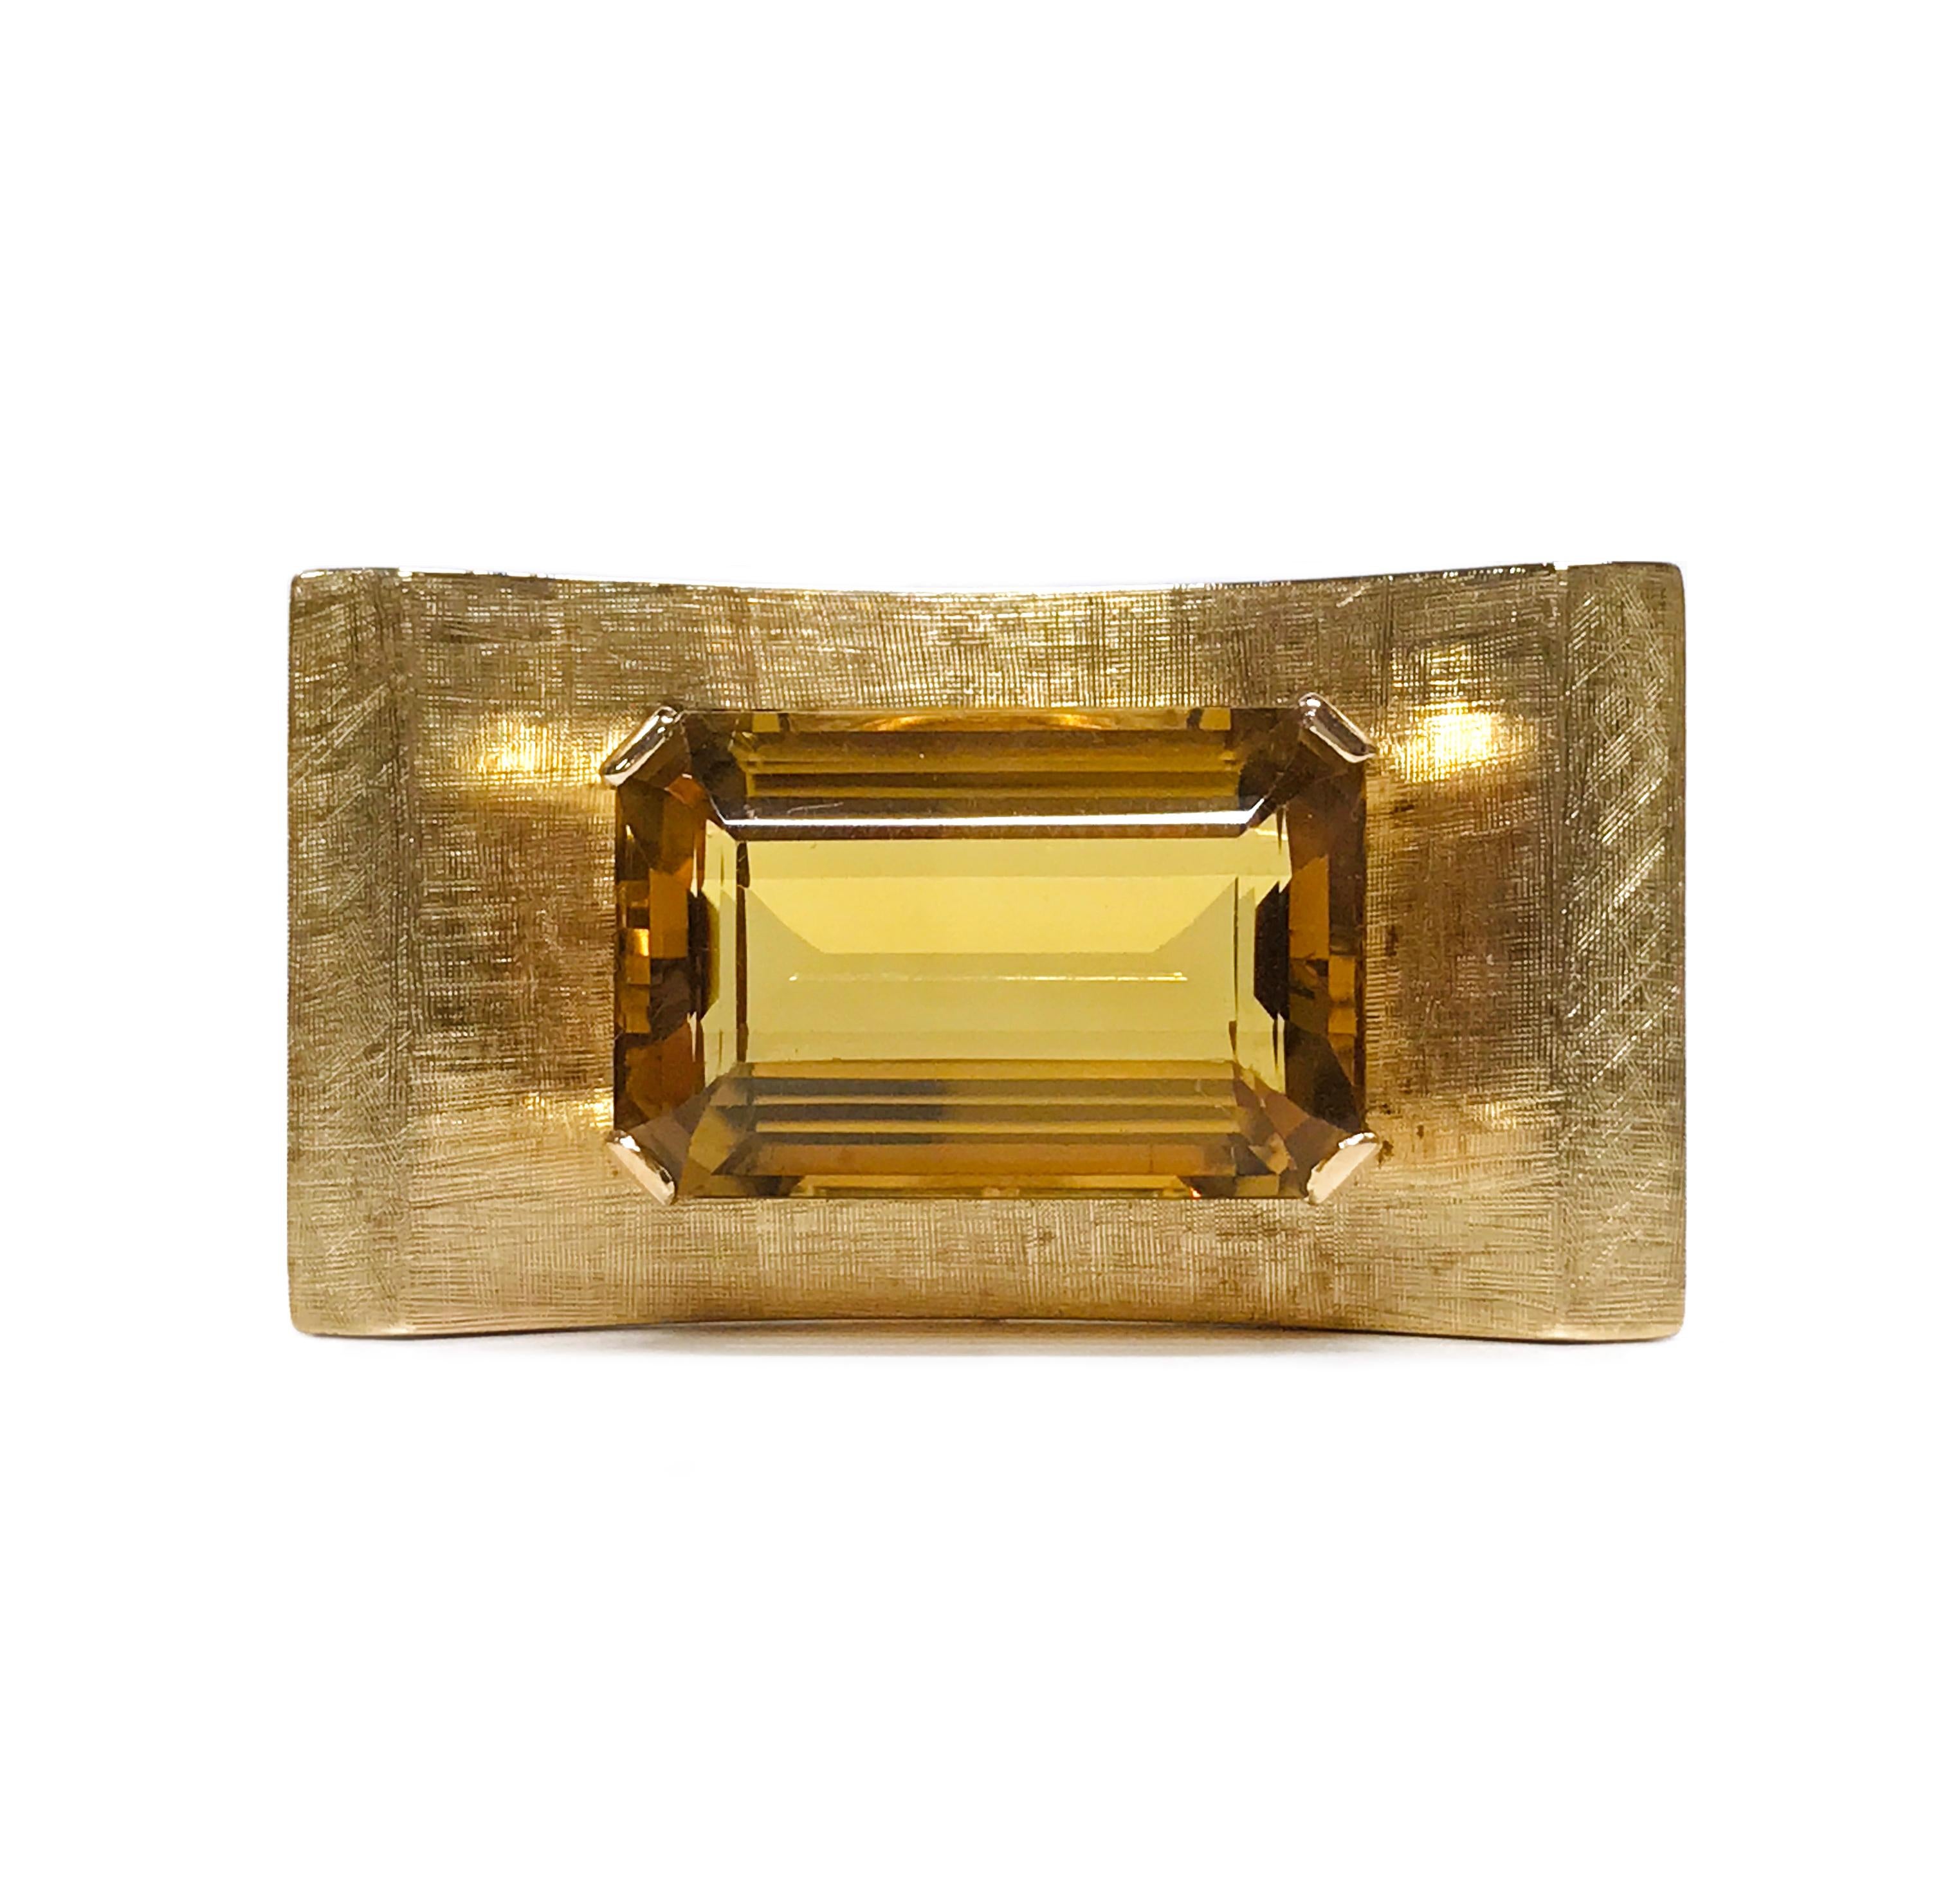 14 Karat Rose Gold tested Citrine Brooch. This handmade brooch features a large 27.47 x 13.3 x 21.00mm emerald-cut Citrine. The total carat weight of the brooch is 42.85ct. The stone is set on a curved rectangular shape with a Florentine finish on